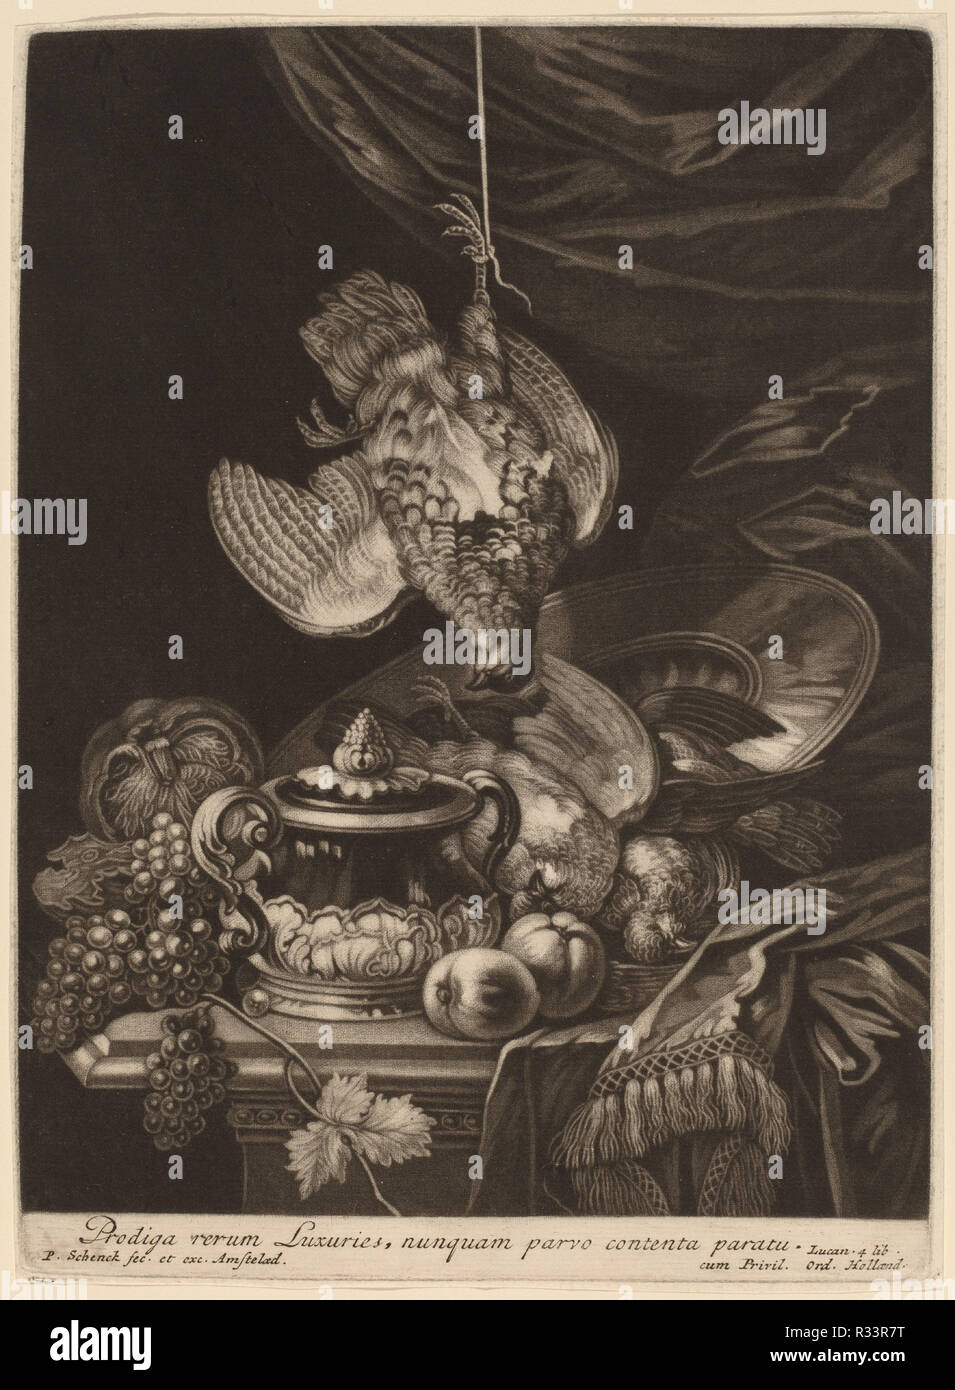 Still Life with a Hanging Partridge. Dimensions: plate: 24.6 x 18 cm (9 11/16 x 7 1/16 in.)  sheet: 24.9 x 18.4 cm (9 13/16 x 7 1/4 in.). Medium: mezzotint on laid paper. Museum: National Gallery of Art, Washington DC. Author: Pieter Schenck I. Stock Photo